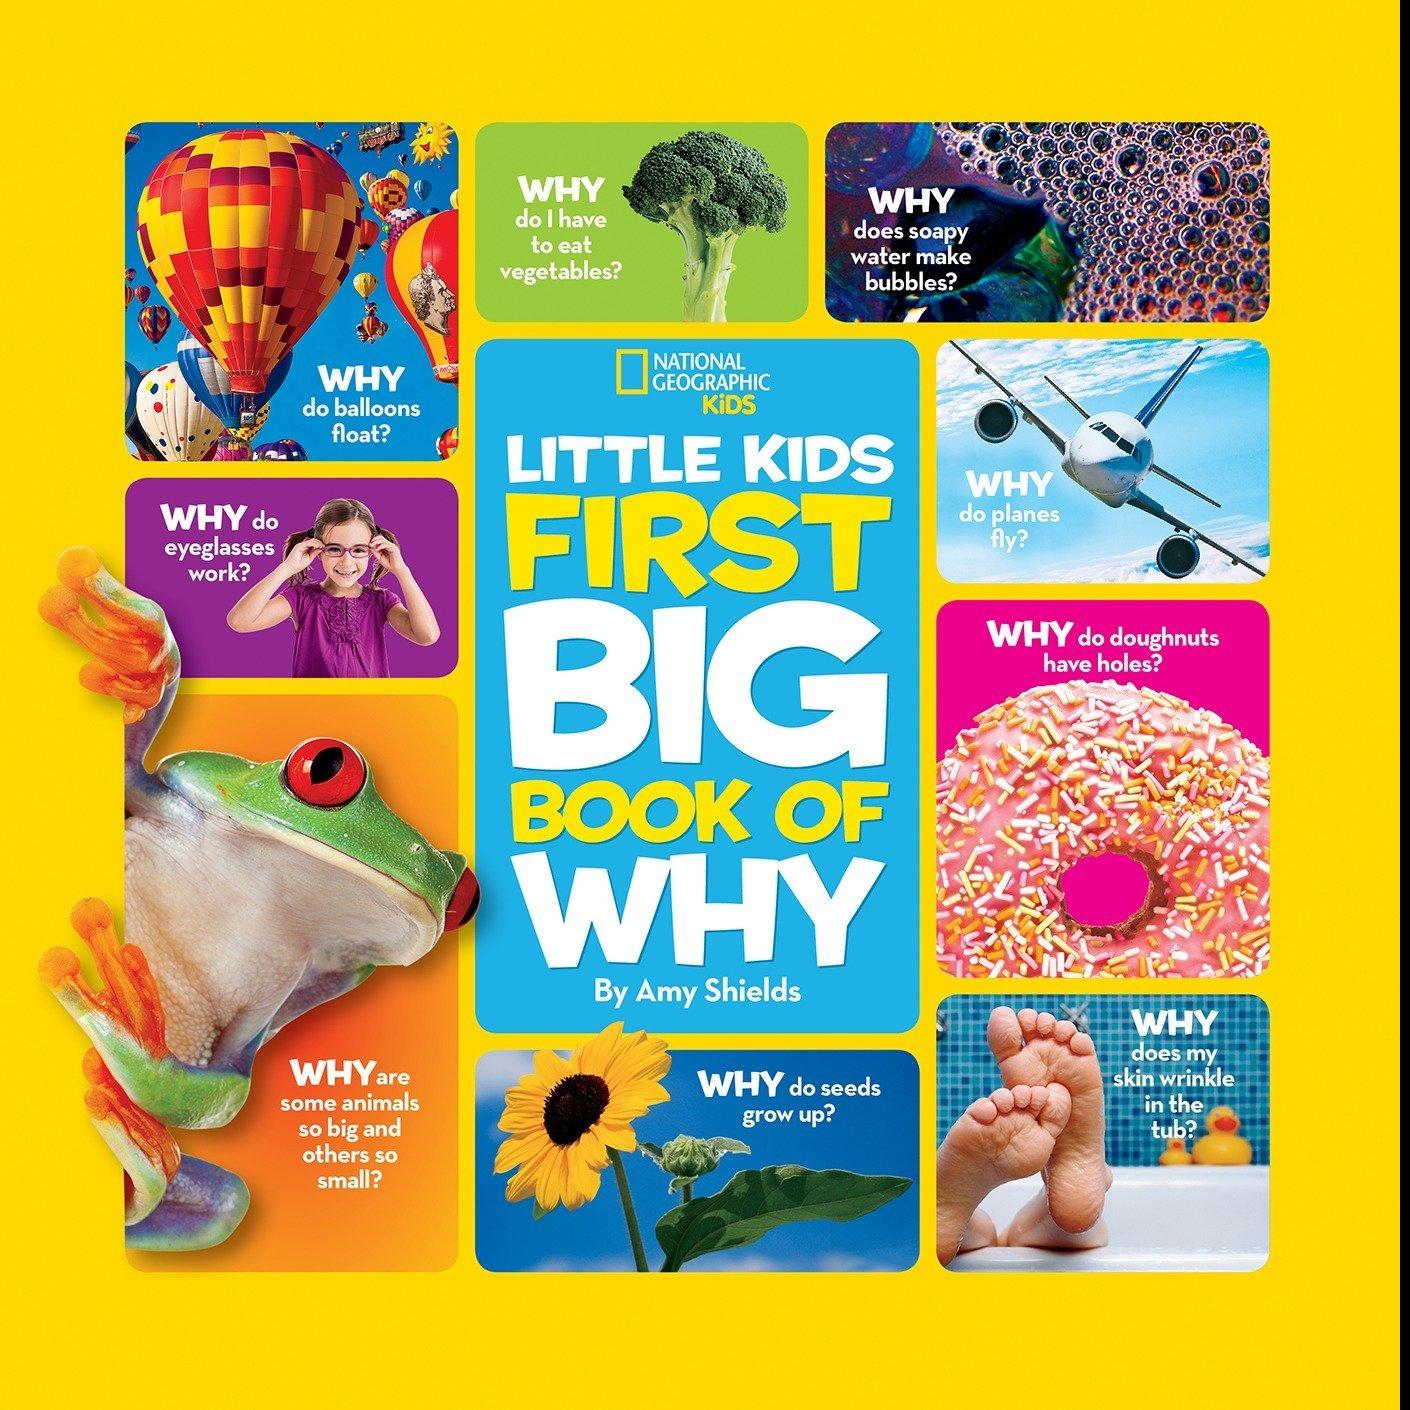 National Geographic Little Kids First Big Book of Why Hardcover for $6.22